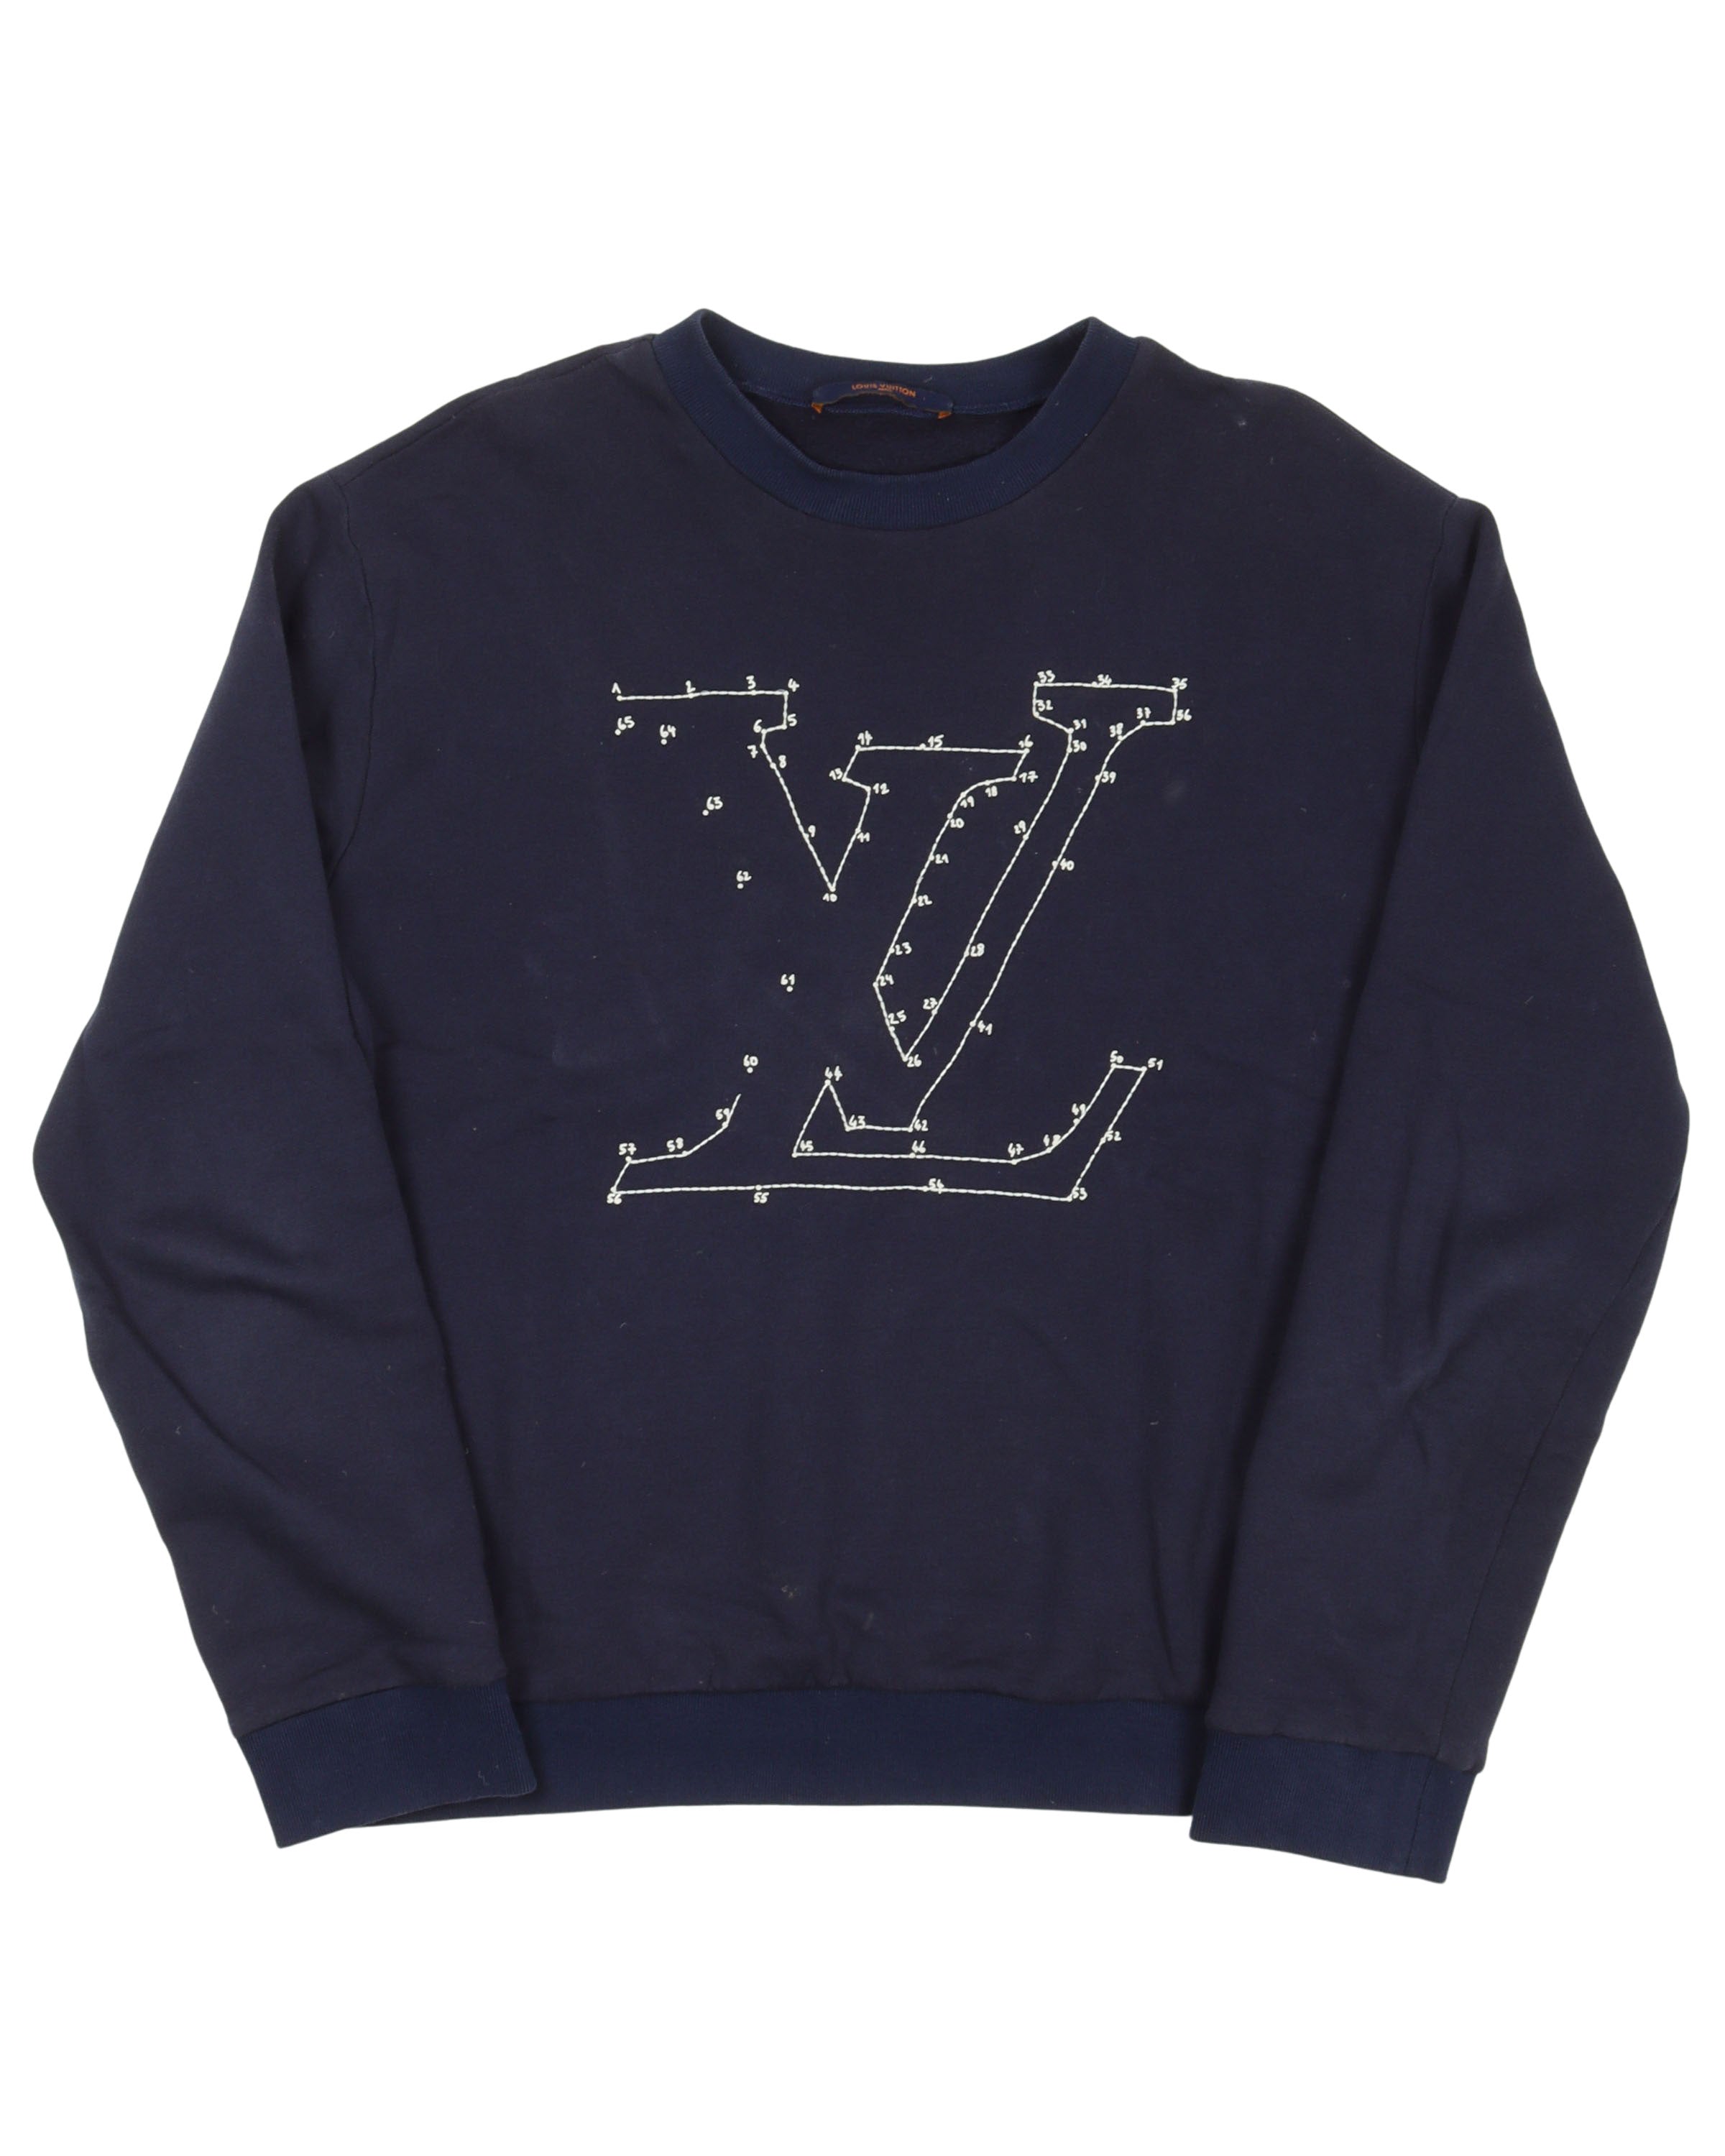 LOUIS VUITTON LV STITCH PRINT AND EMBROIDERED T-SHIRT